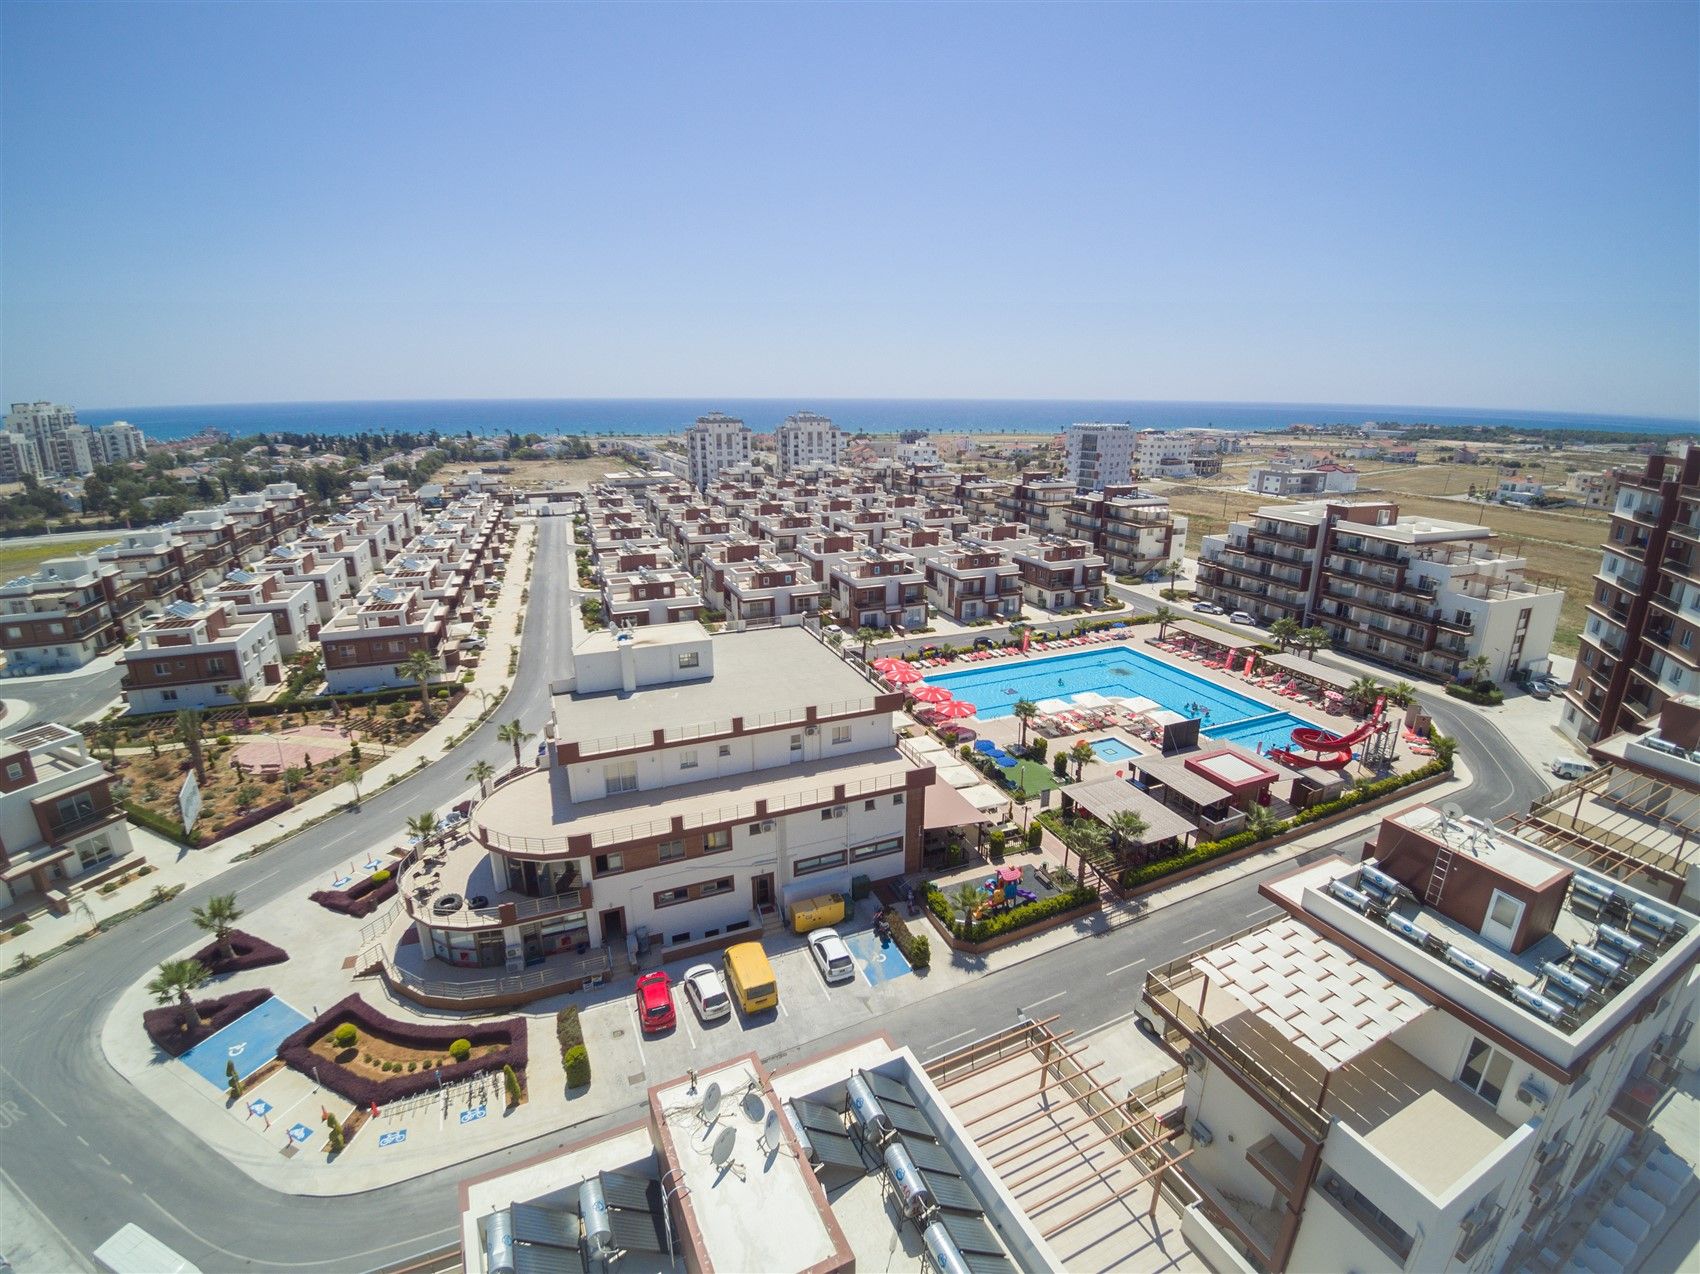 Studio apartments in the largest project on the coast of North Cyprus